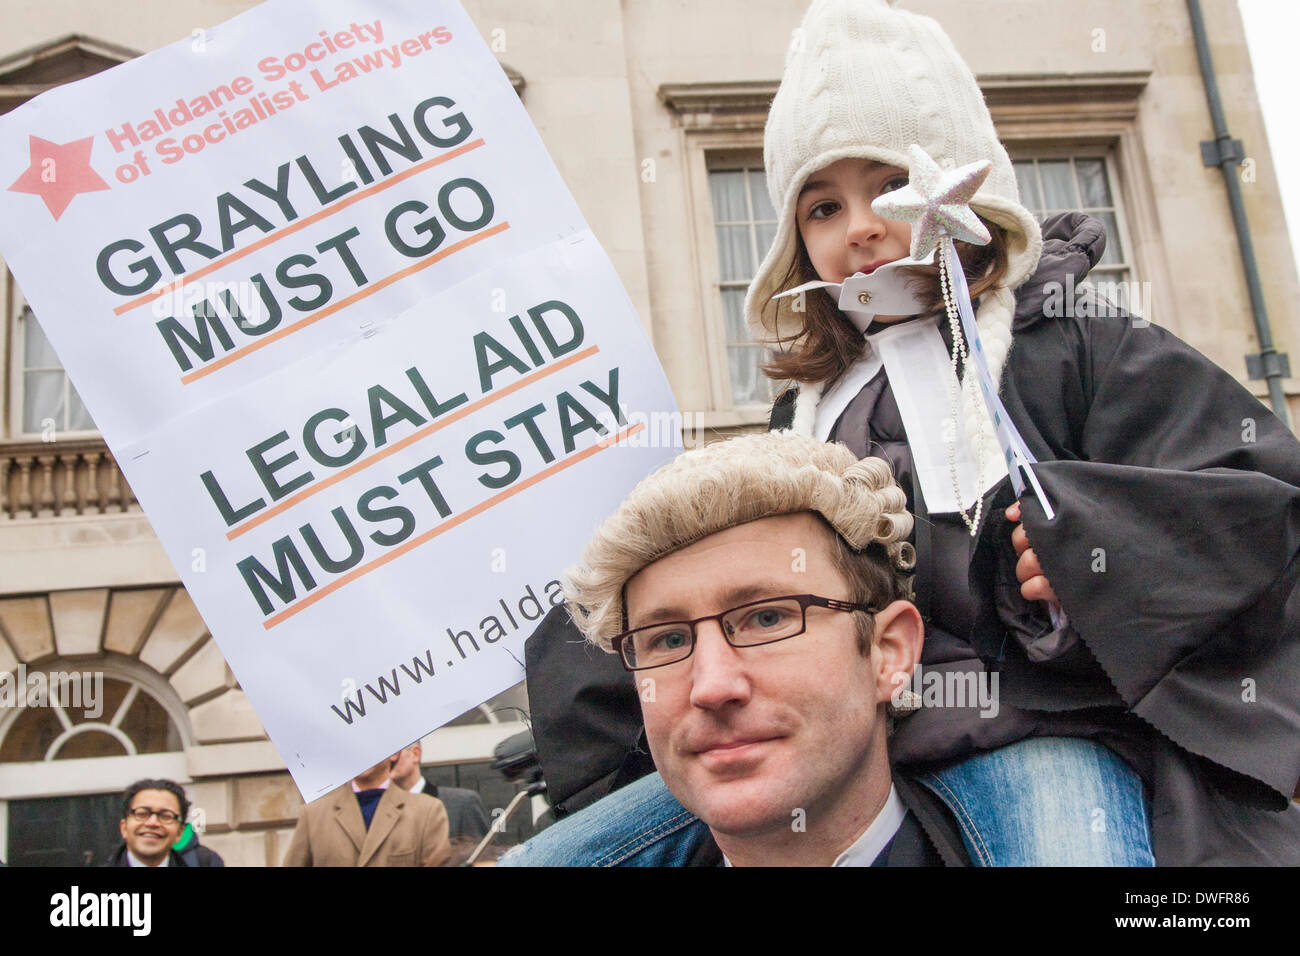 London March 7th 2014. Barristers and solicitors in London walk out in protest against further cuts of £215 million to the legal aid budget, and a reduction by a third of duty lawyers' contracts. Credit:  Paul Davey/Alamy Live News Stock Photo